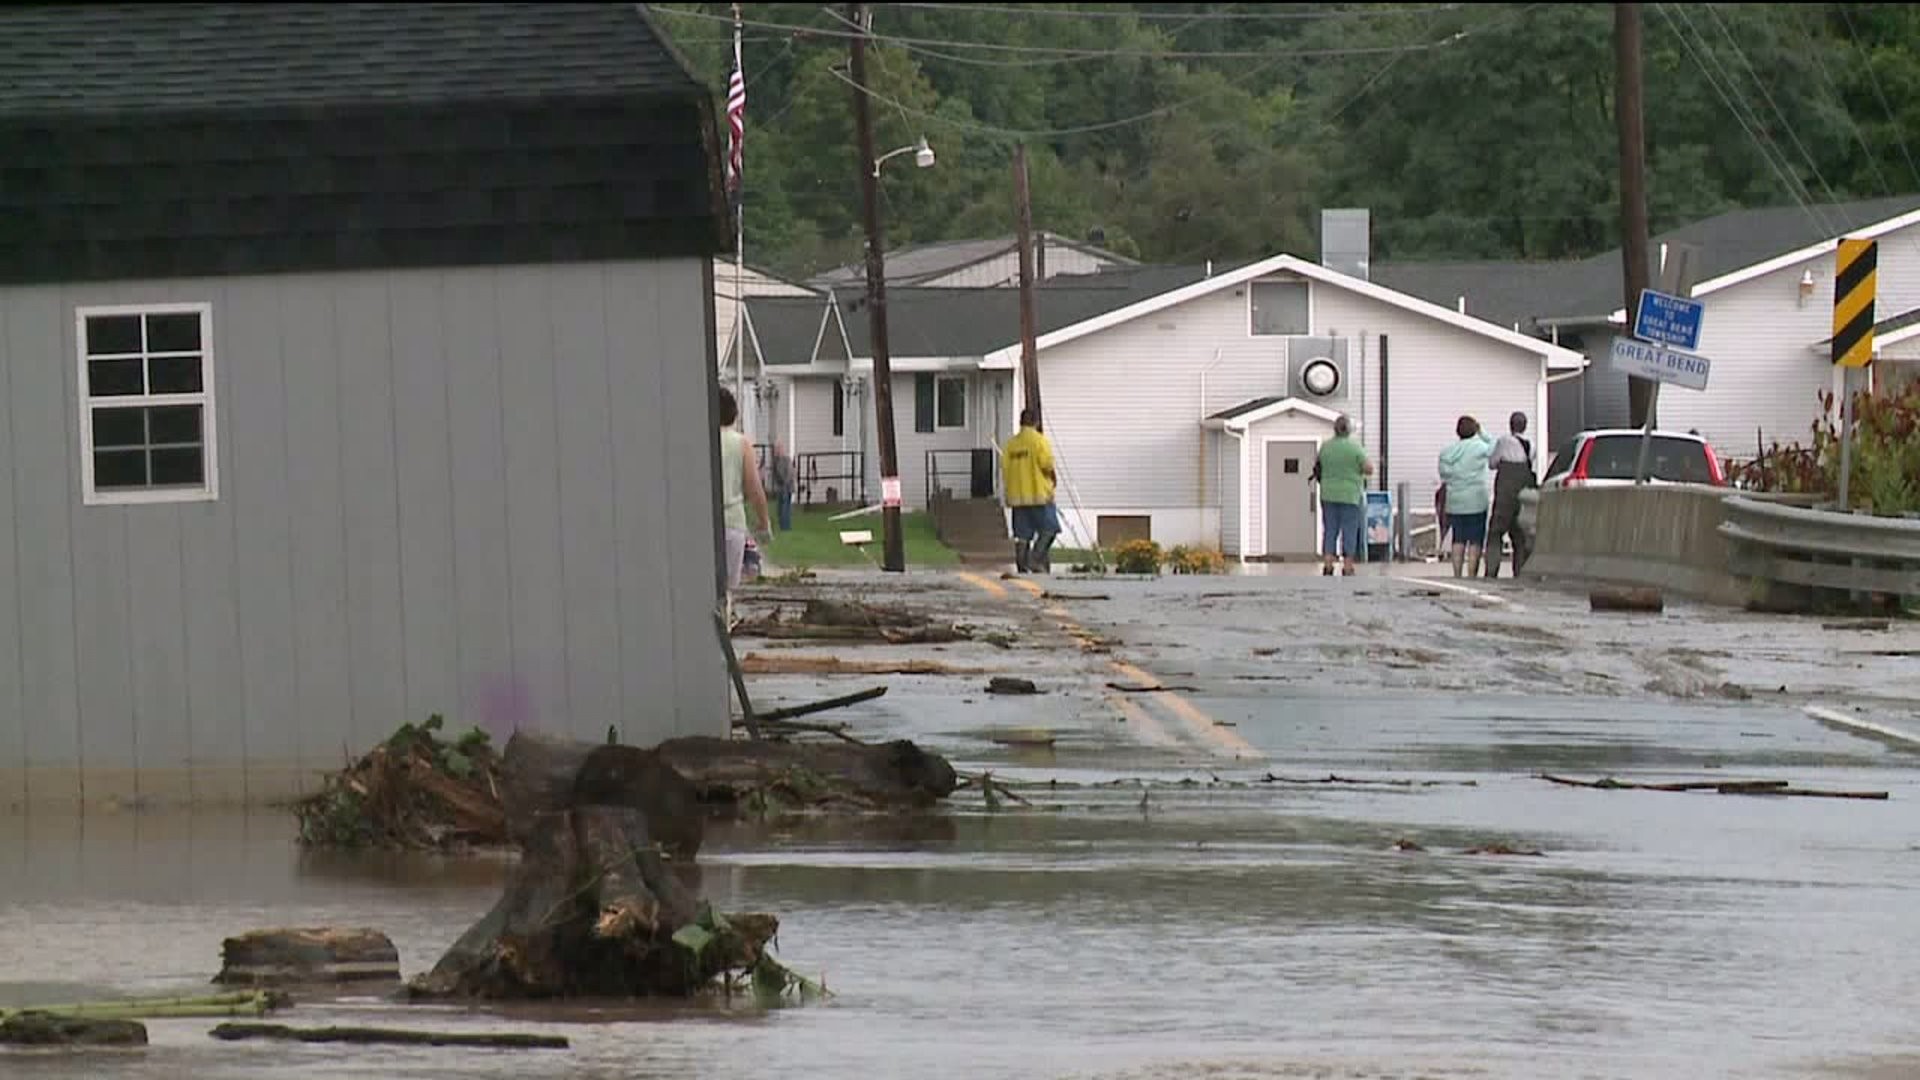 Getting Help After Flooding in Susquehanna County